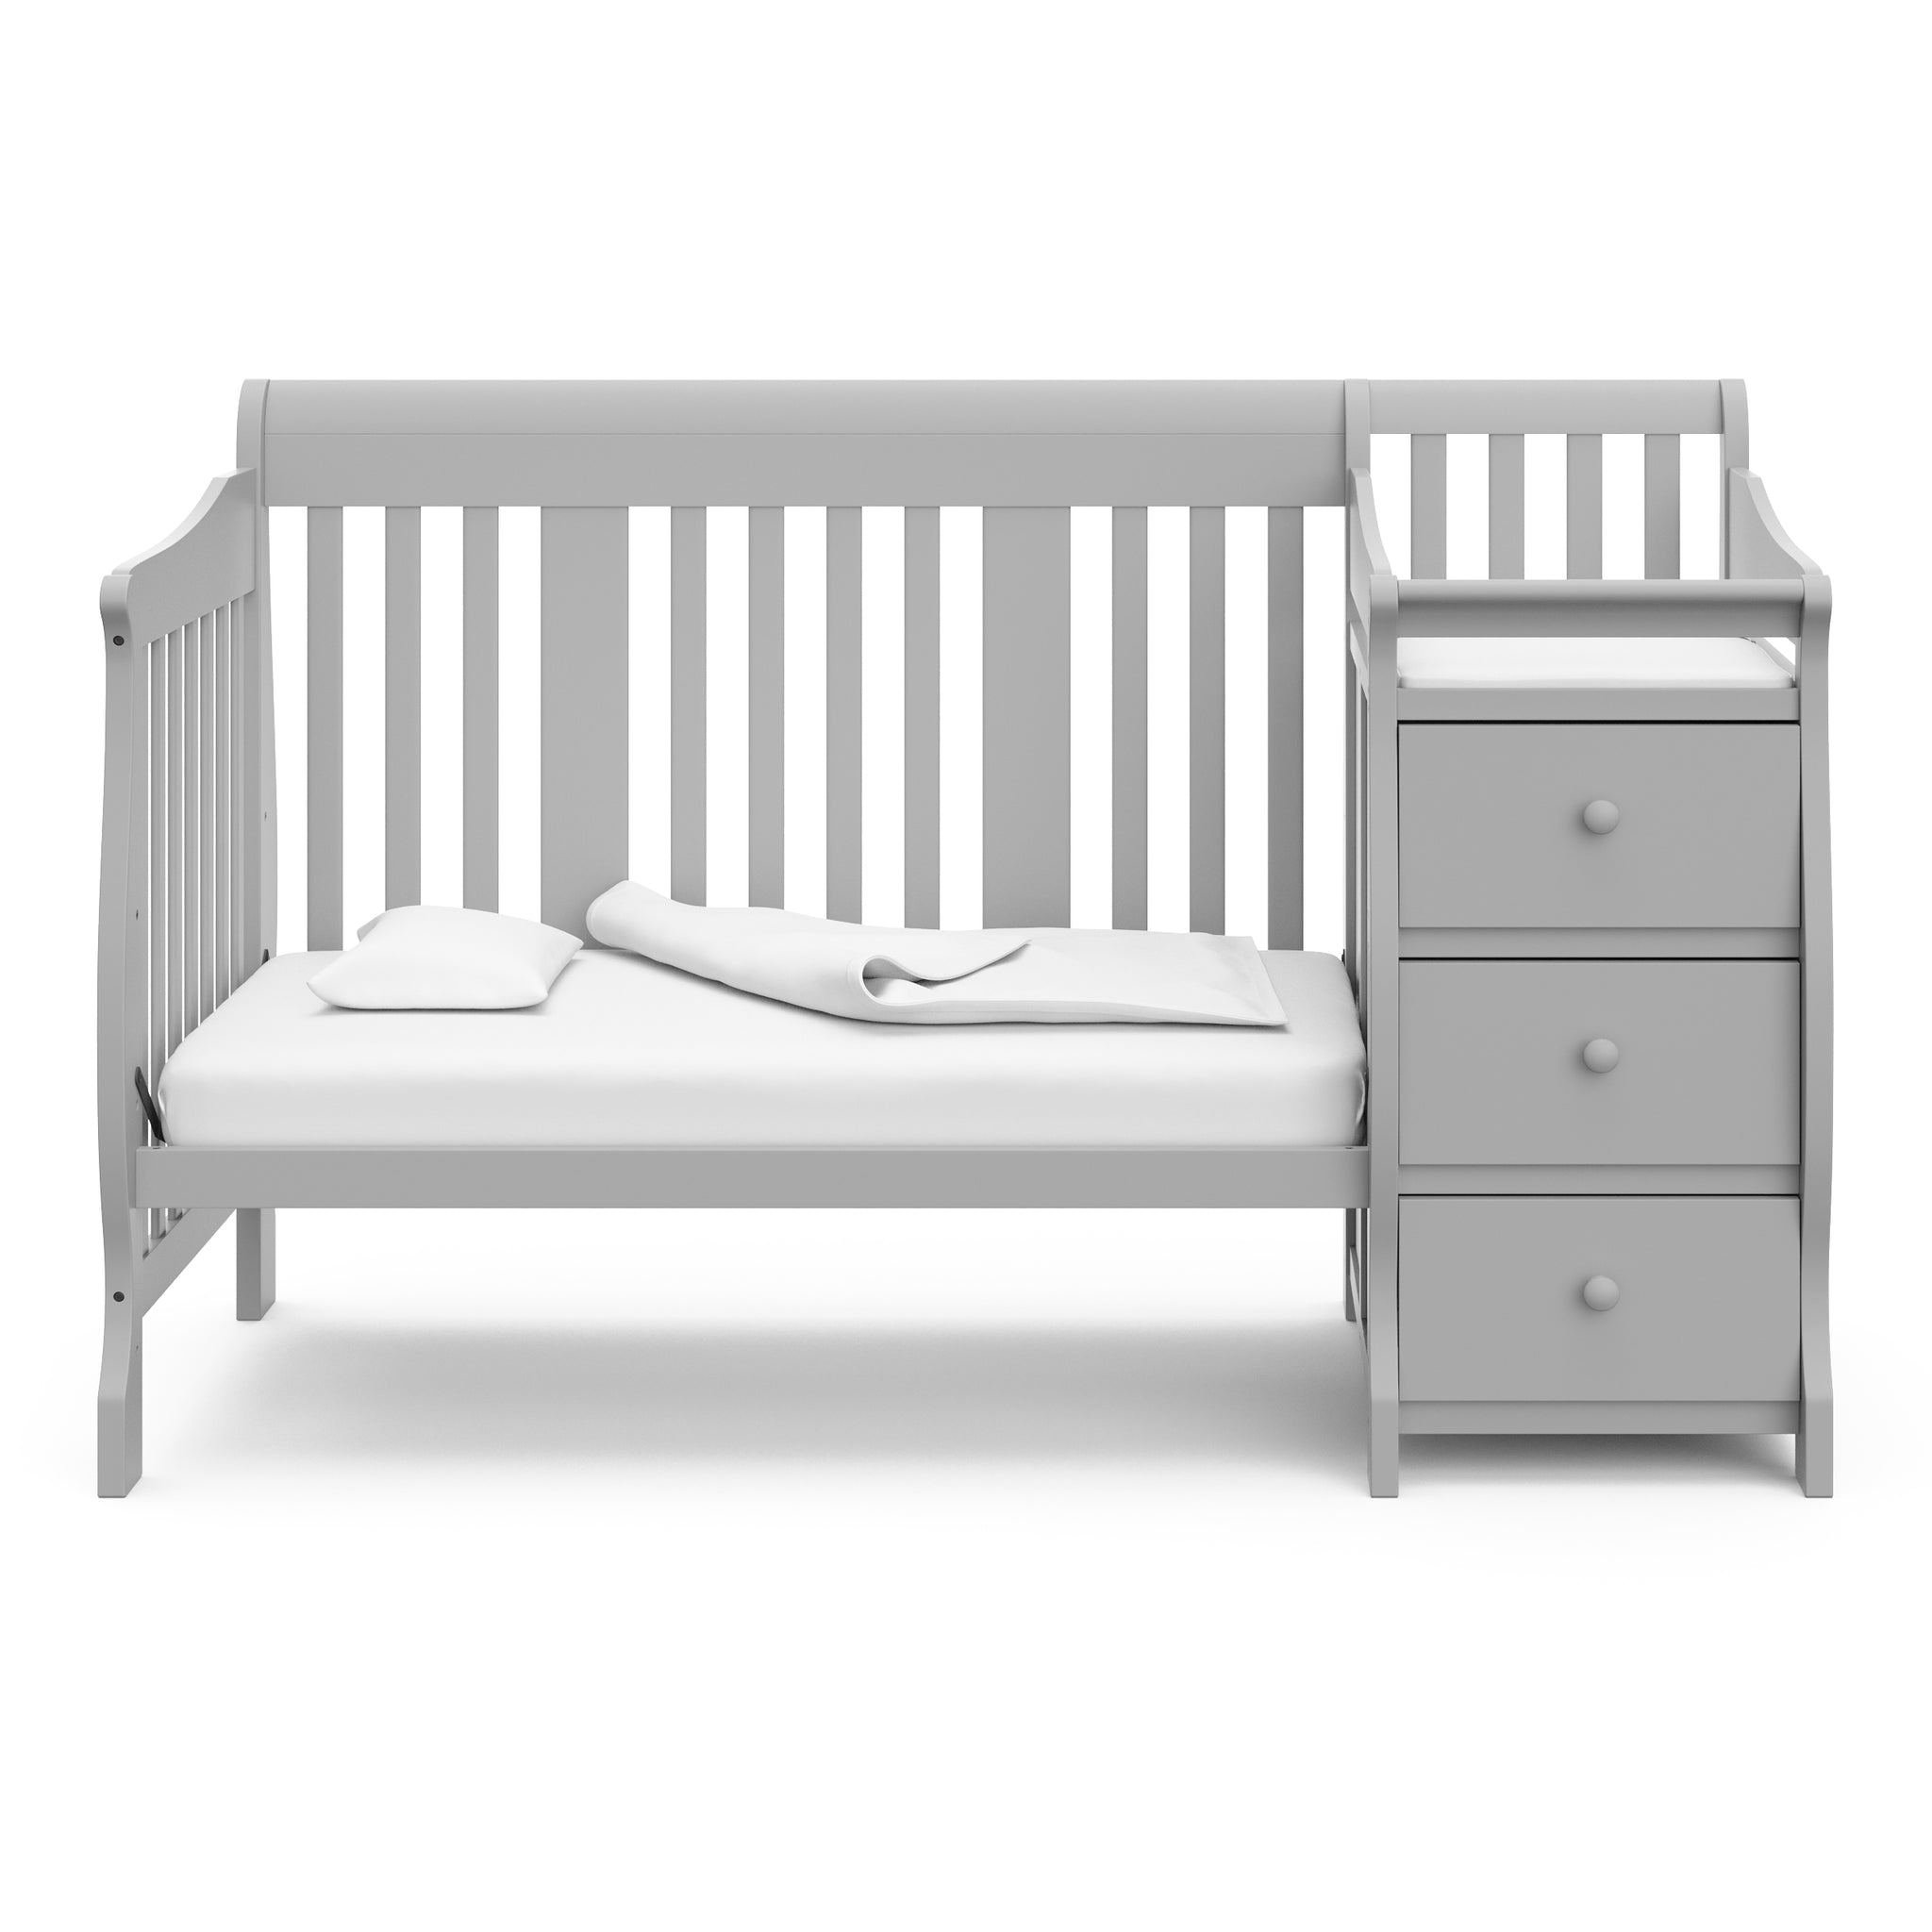 Pebble gray crib and changer in toddler bed conversion 